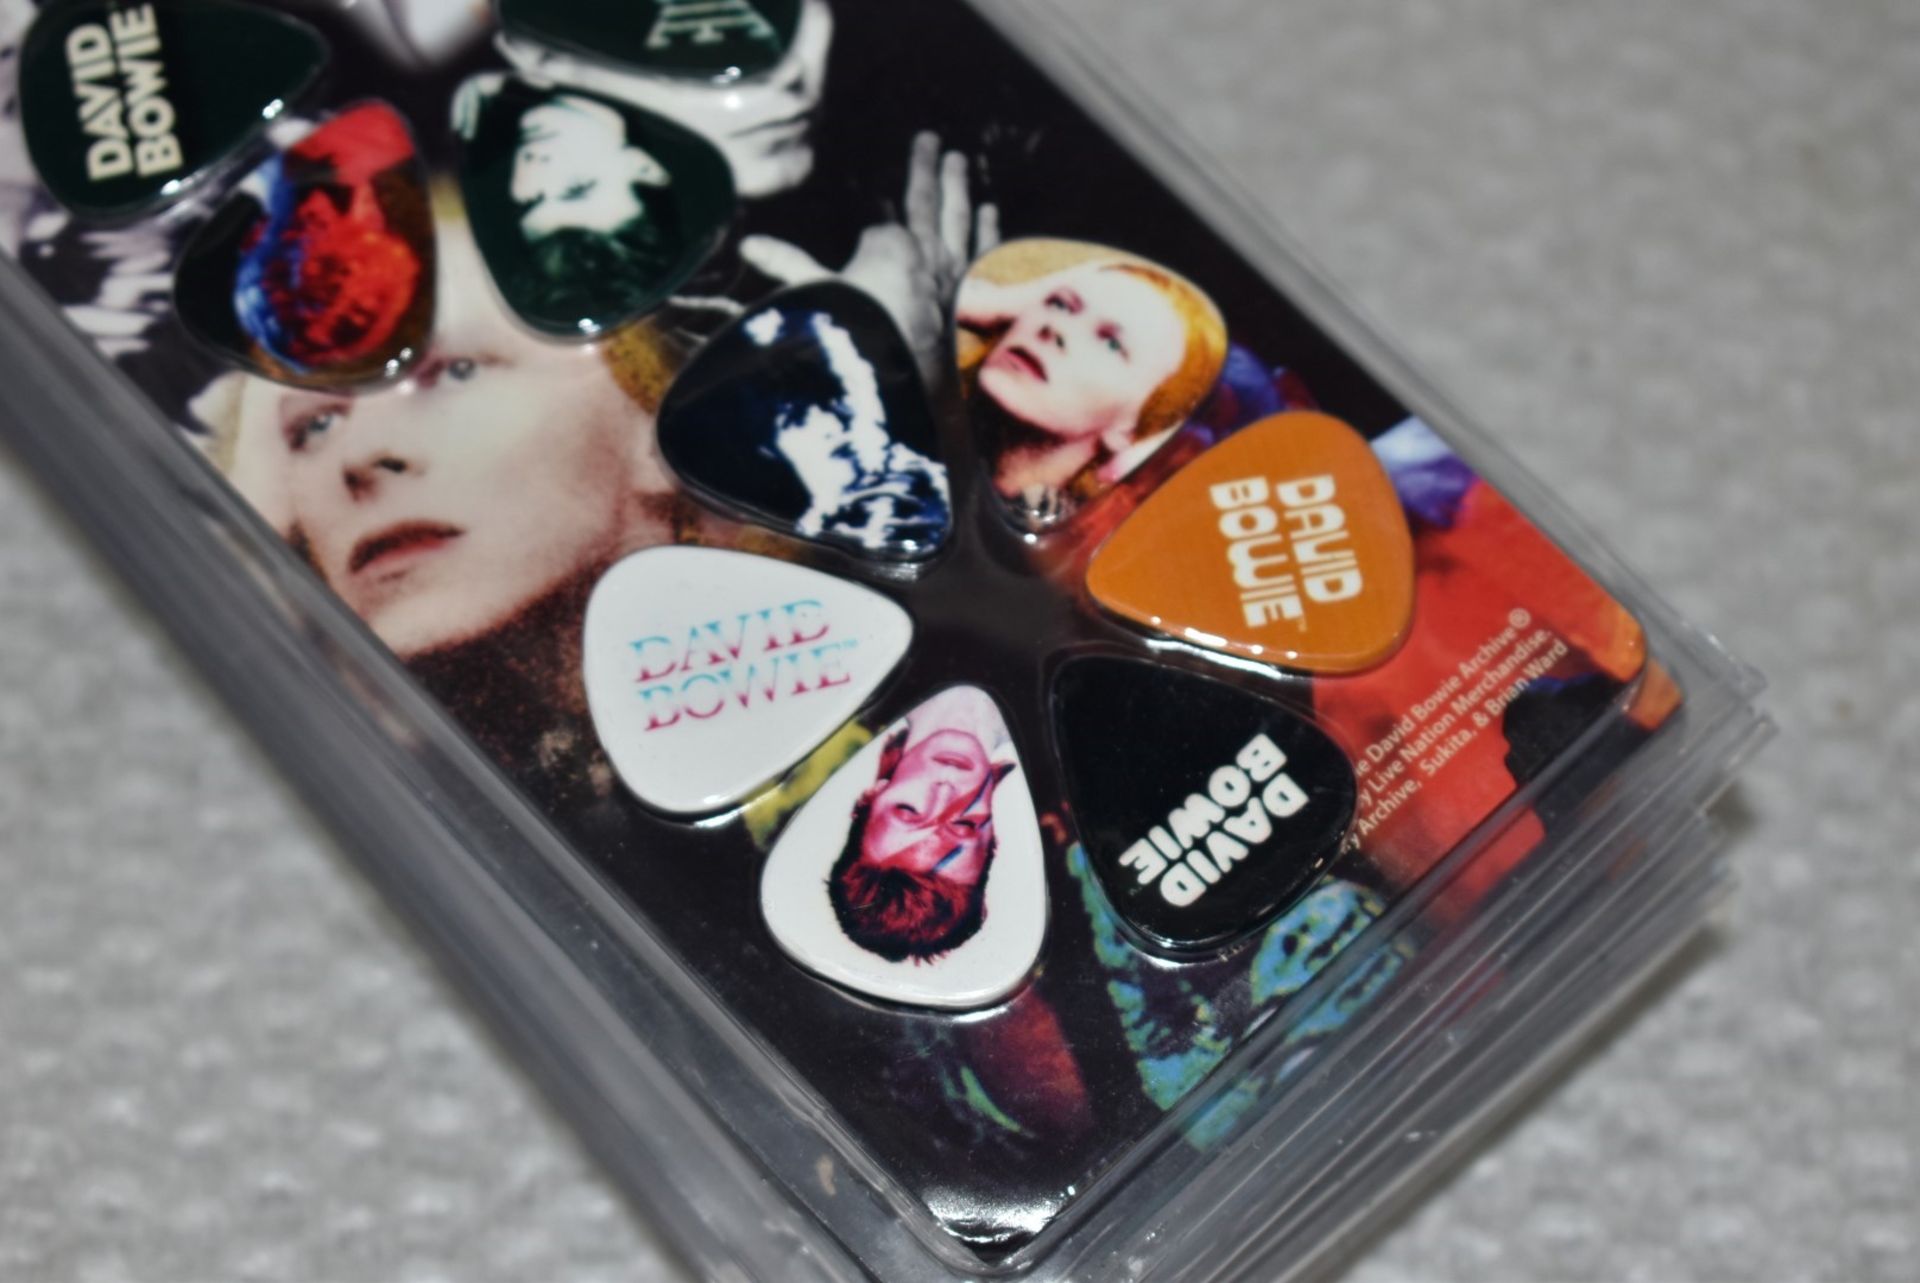 10 x David Bowie Guitar Pick Multipacks By Perri's - 6 Picks Per Pack - Officially Licensed - Image 2 of 7